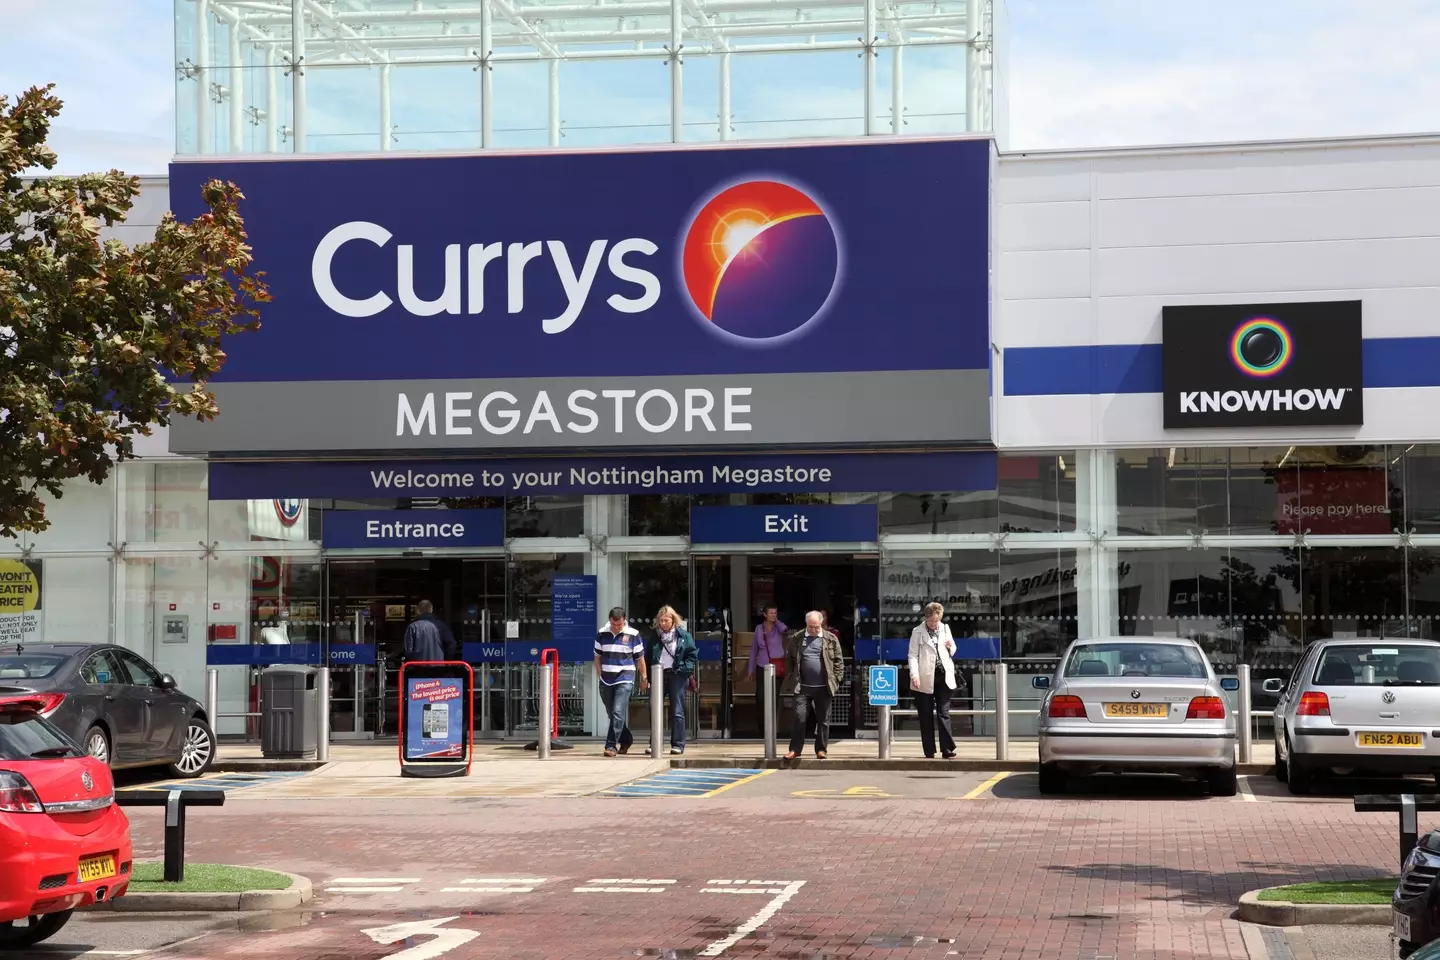 This seems like an unambiguous 'W' for Currys.